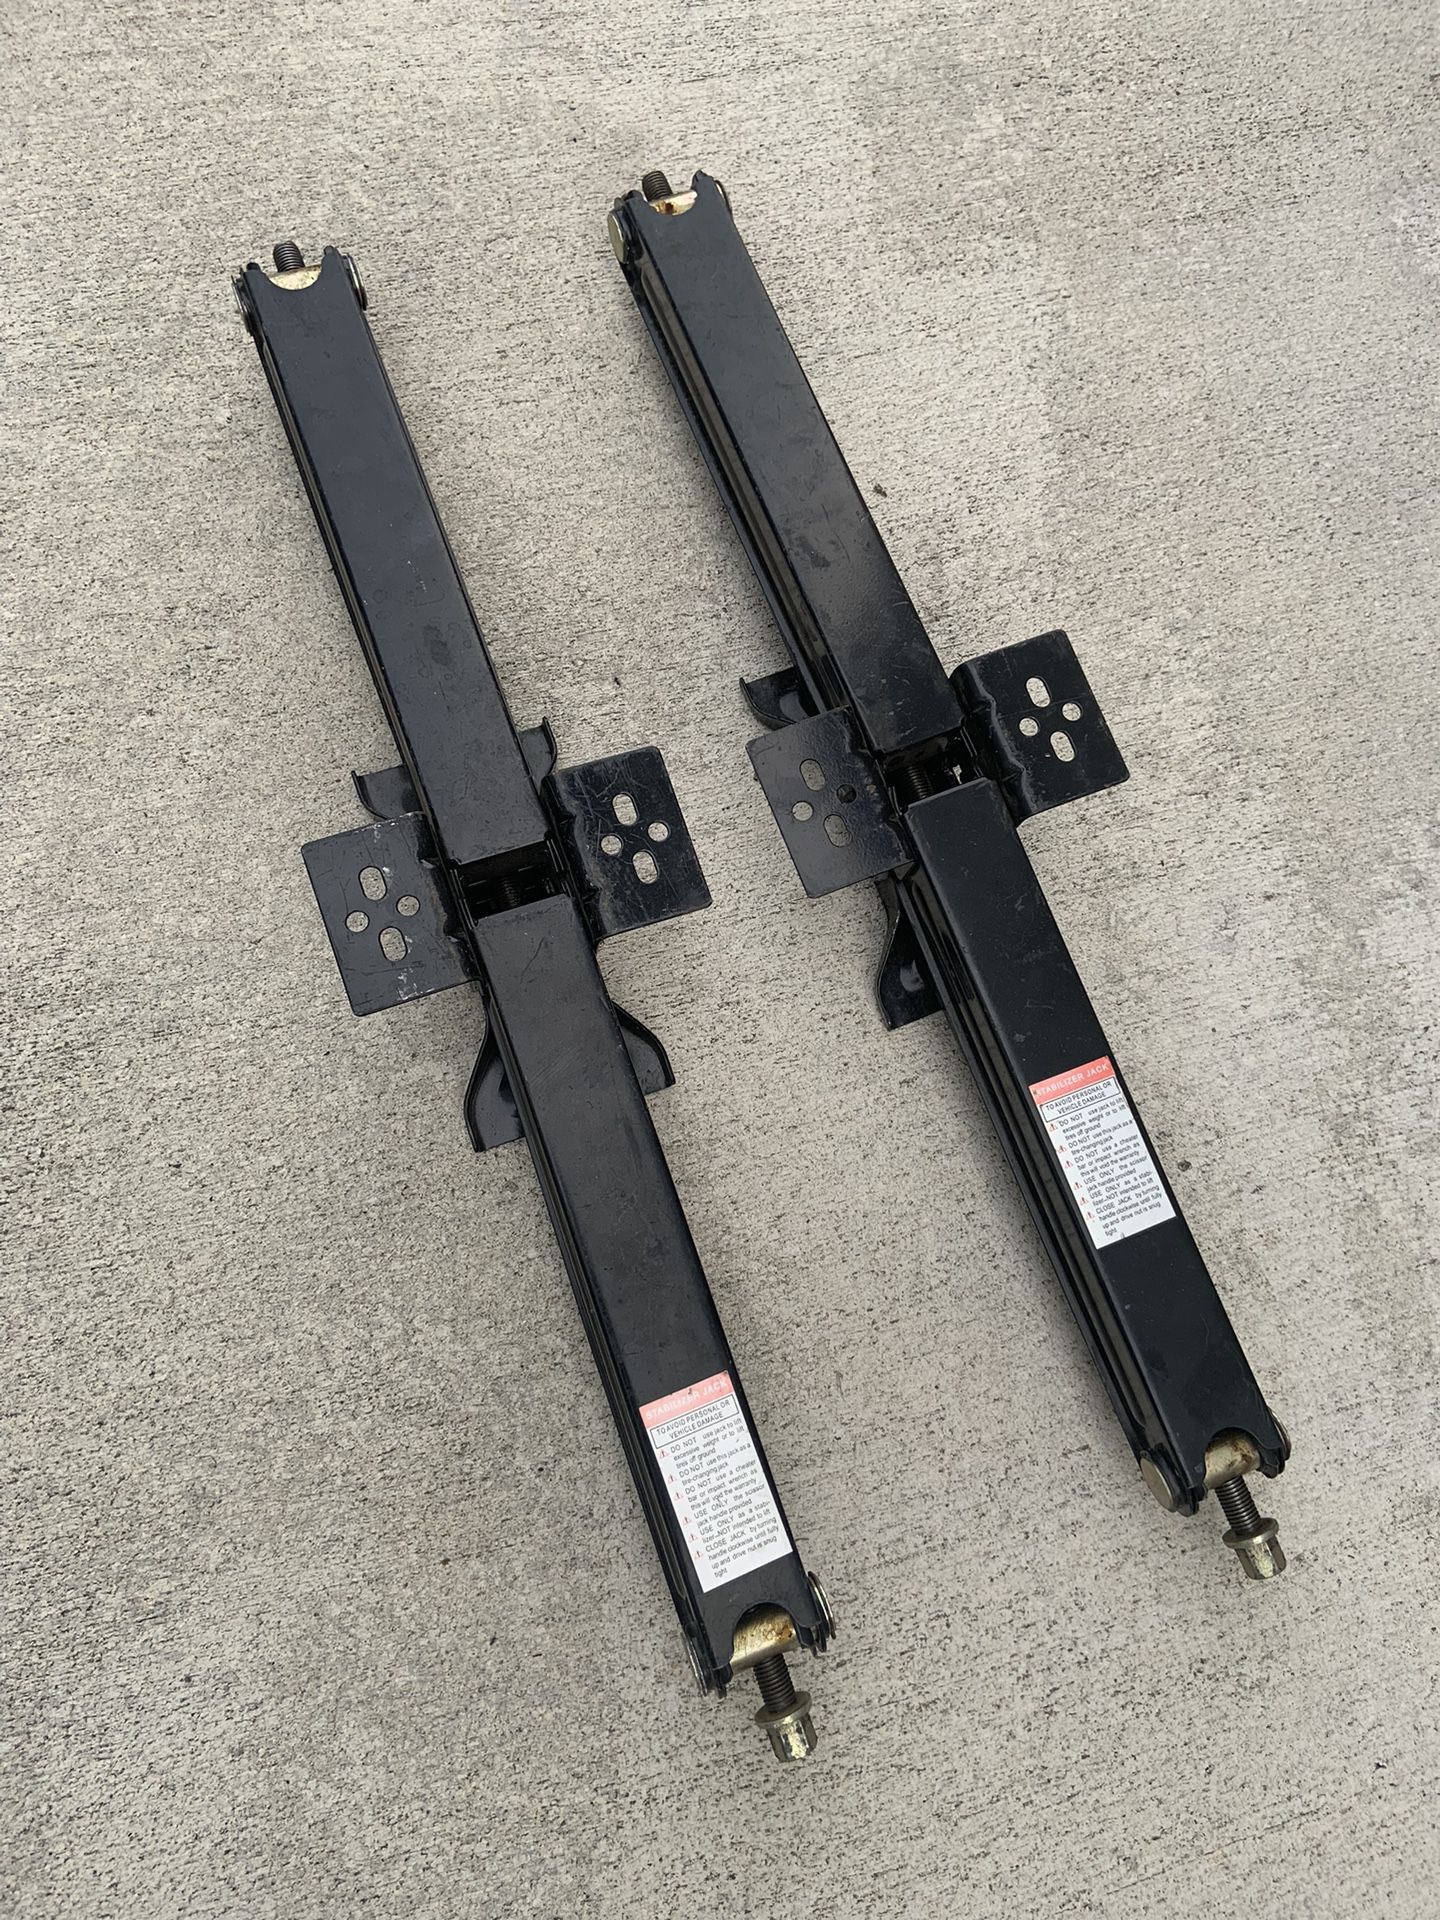 Two Jacks for RV or trailer.